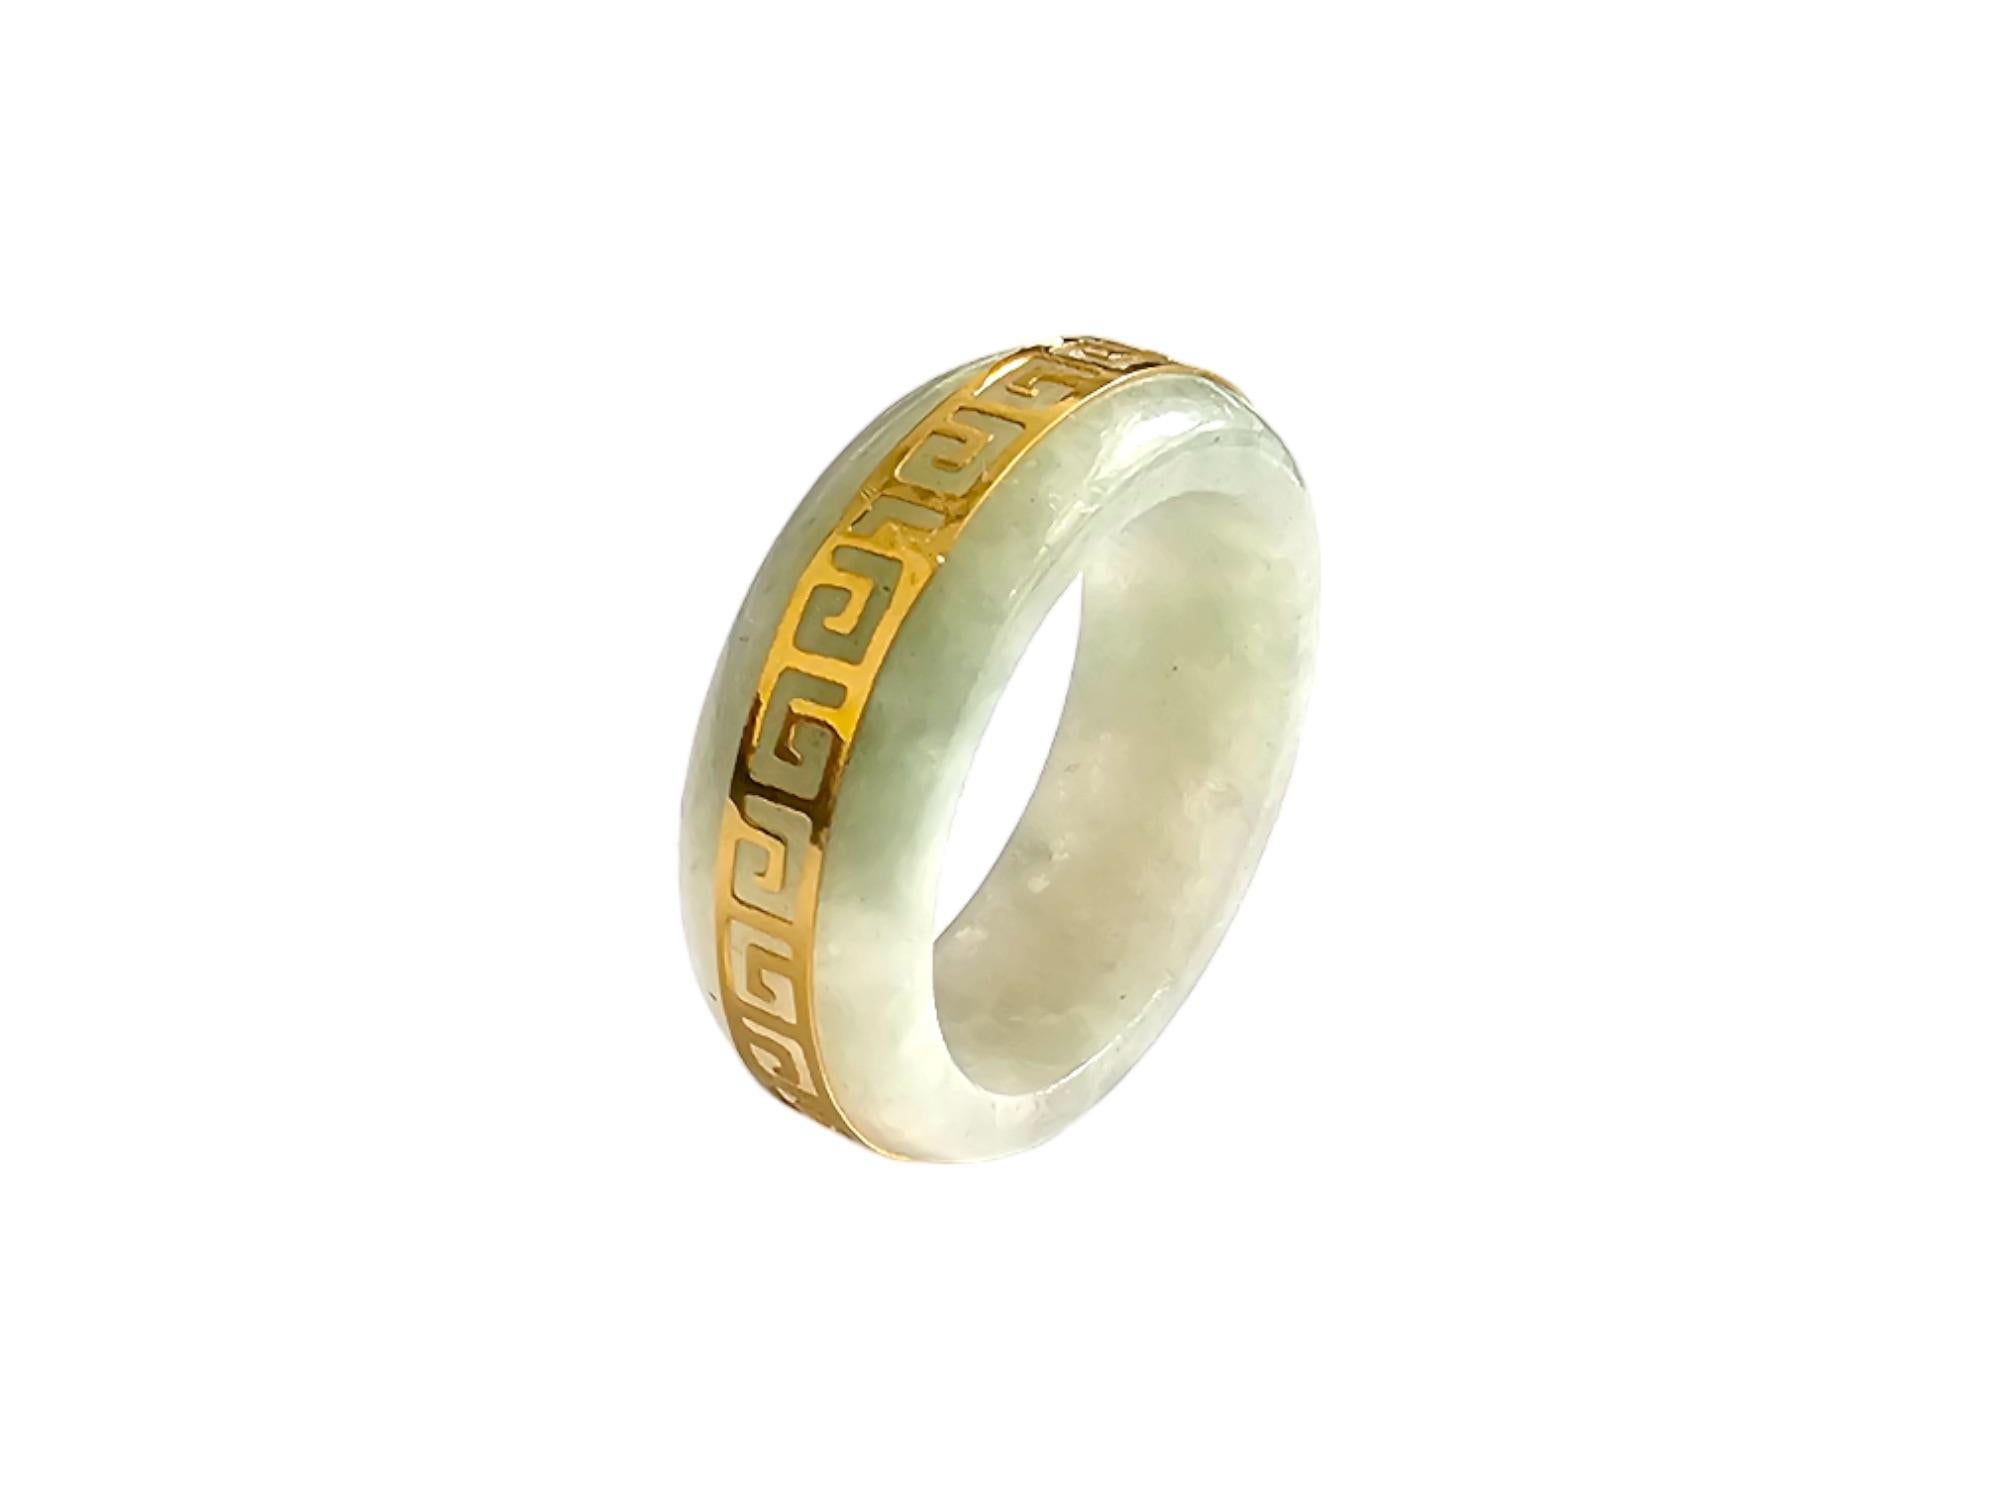 Li Spring Jade Band Ring (With 14k Solid Gold) - Cocktail Ring for Men and Women For Sale 3